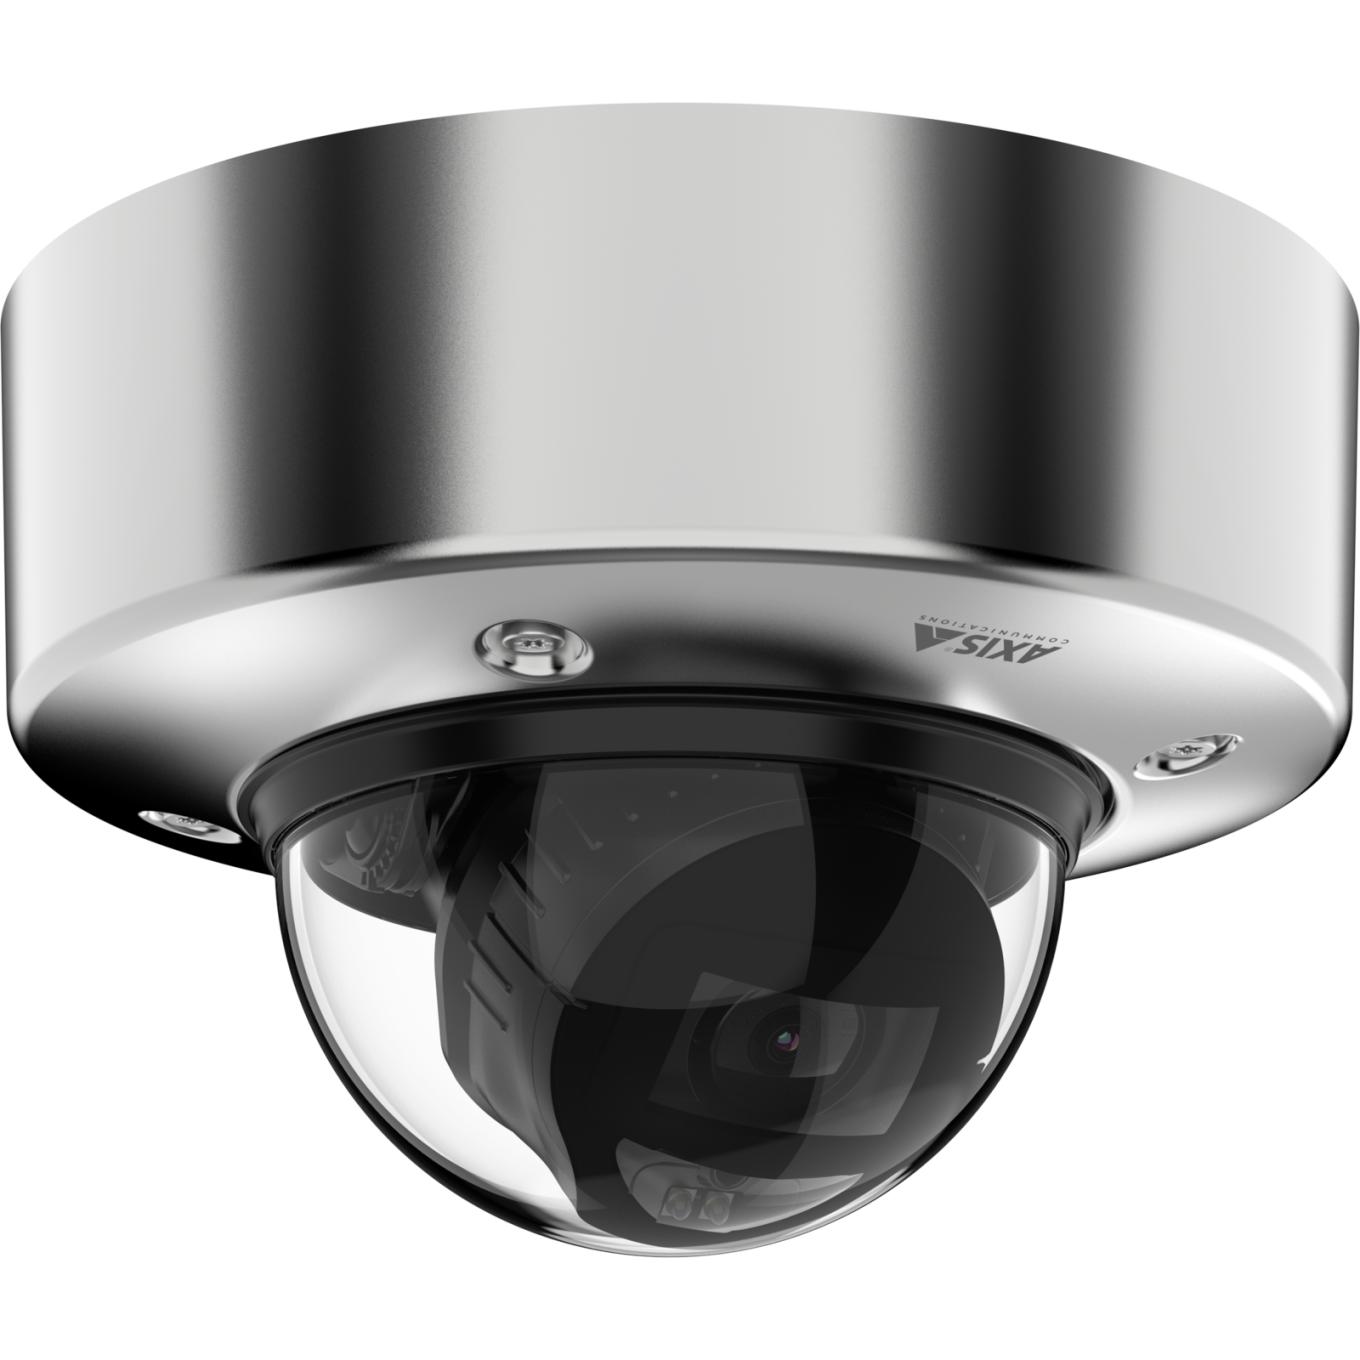 AXIS P3268-SLVE Stainless steel Dome Camera vista frontale